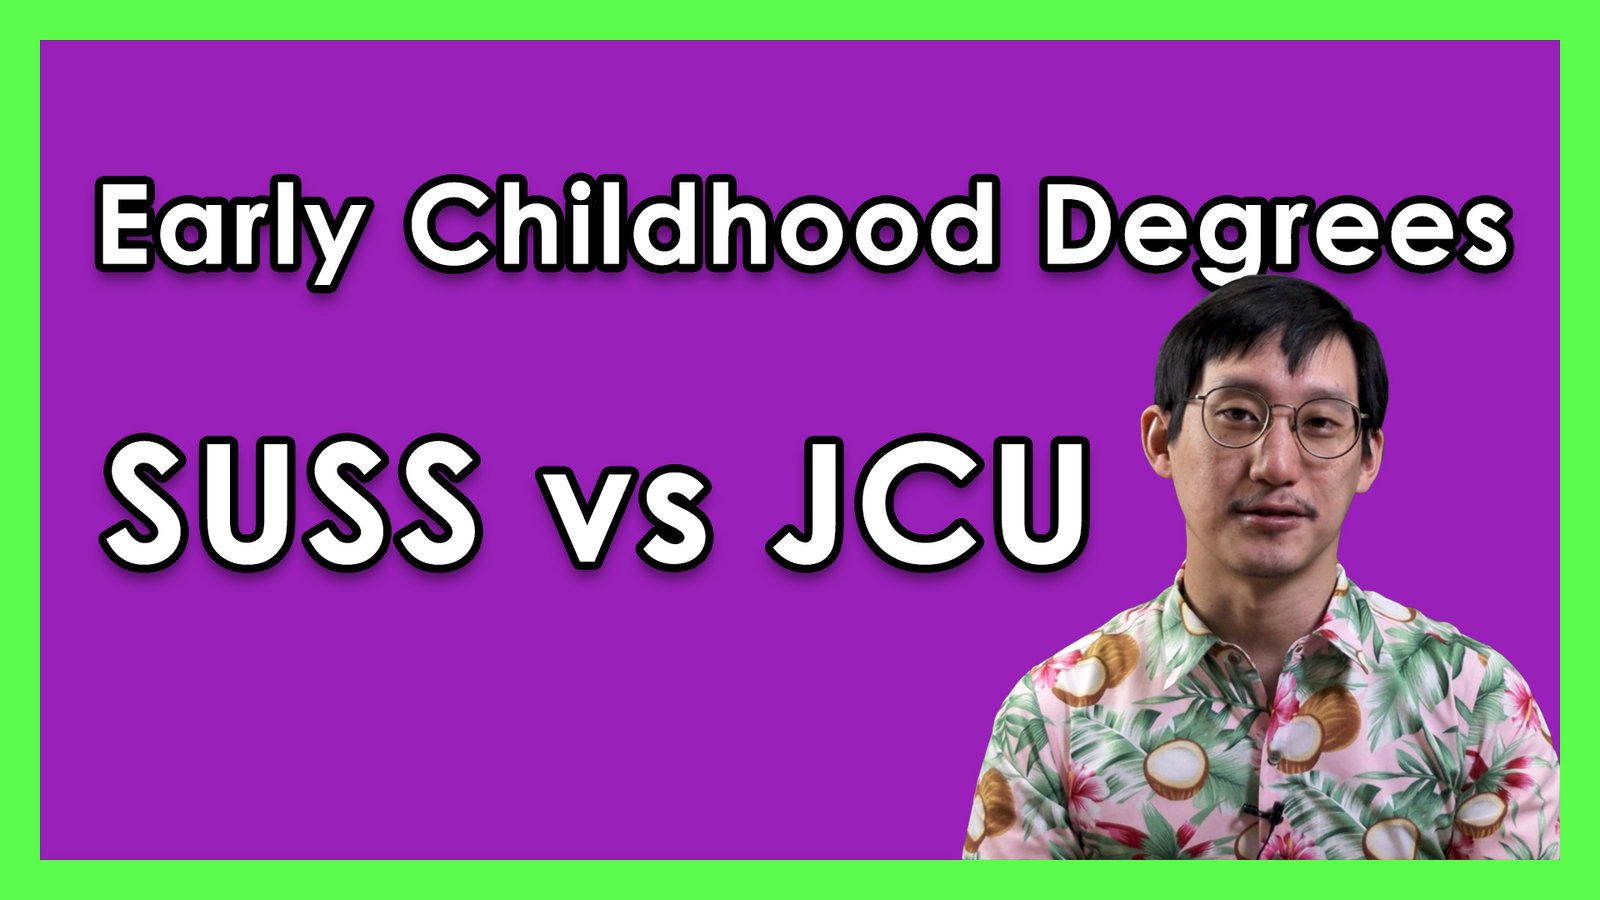 JCU vs SUSS Early Childhood Education Degrees